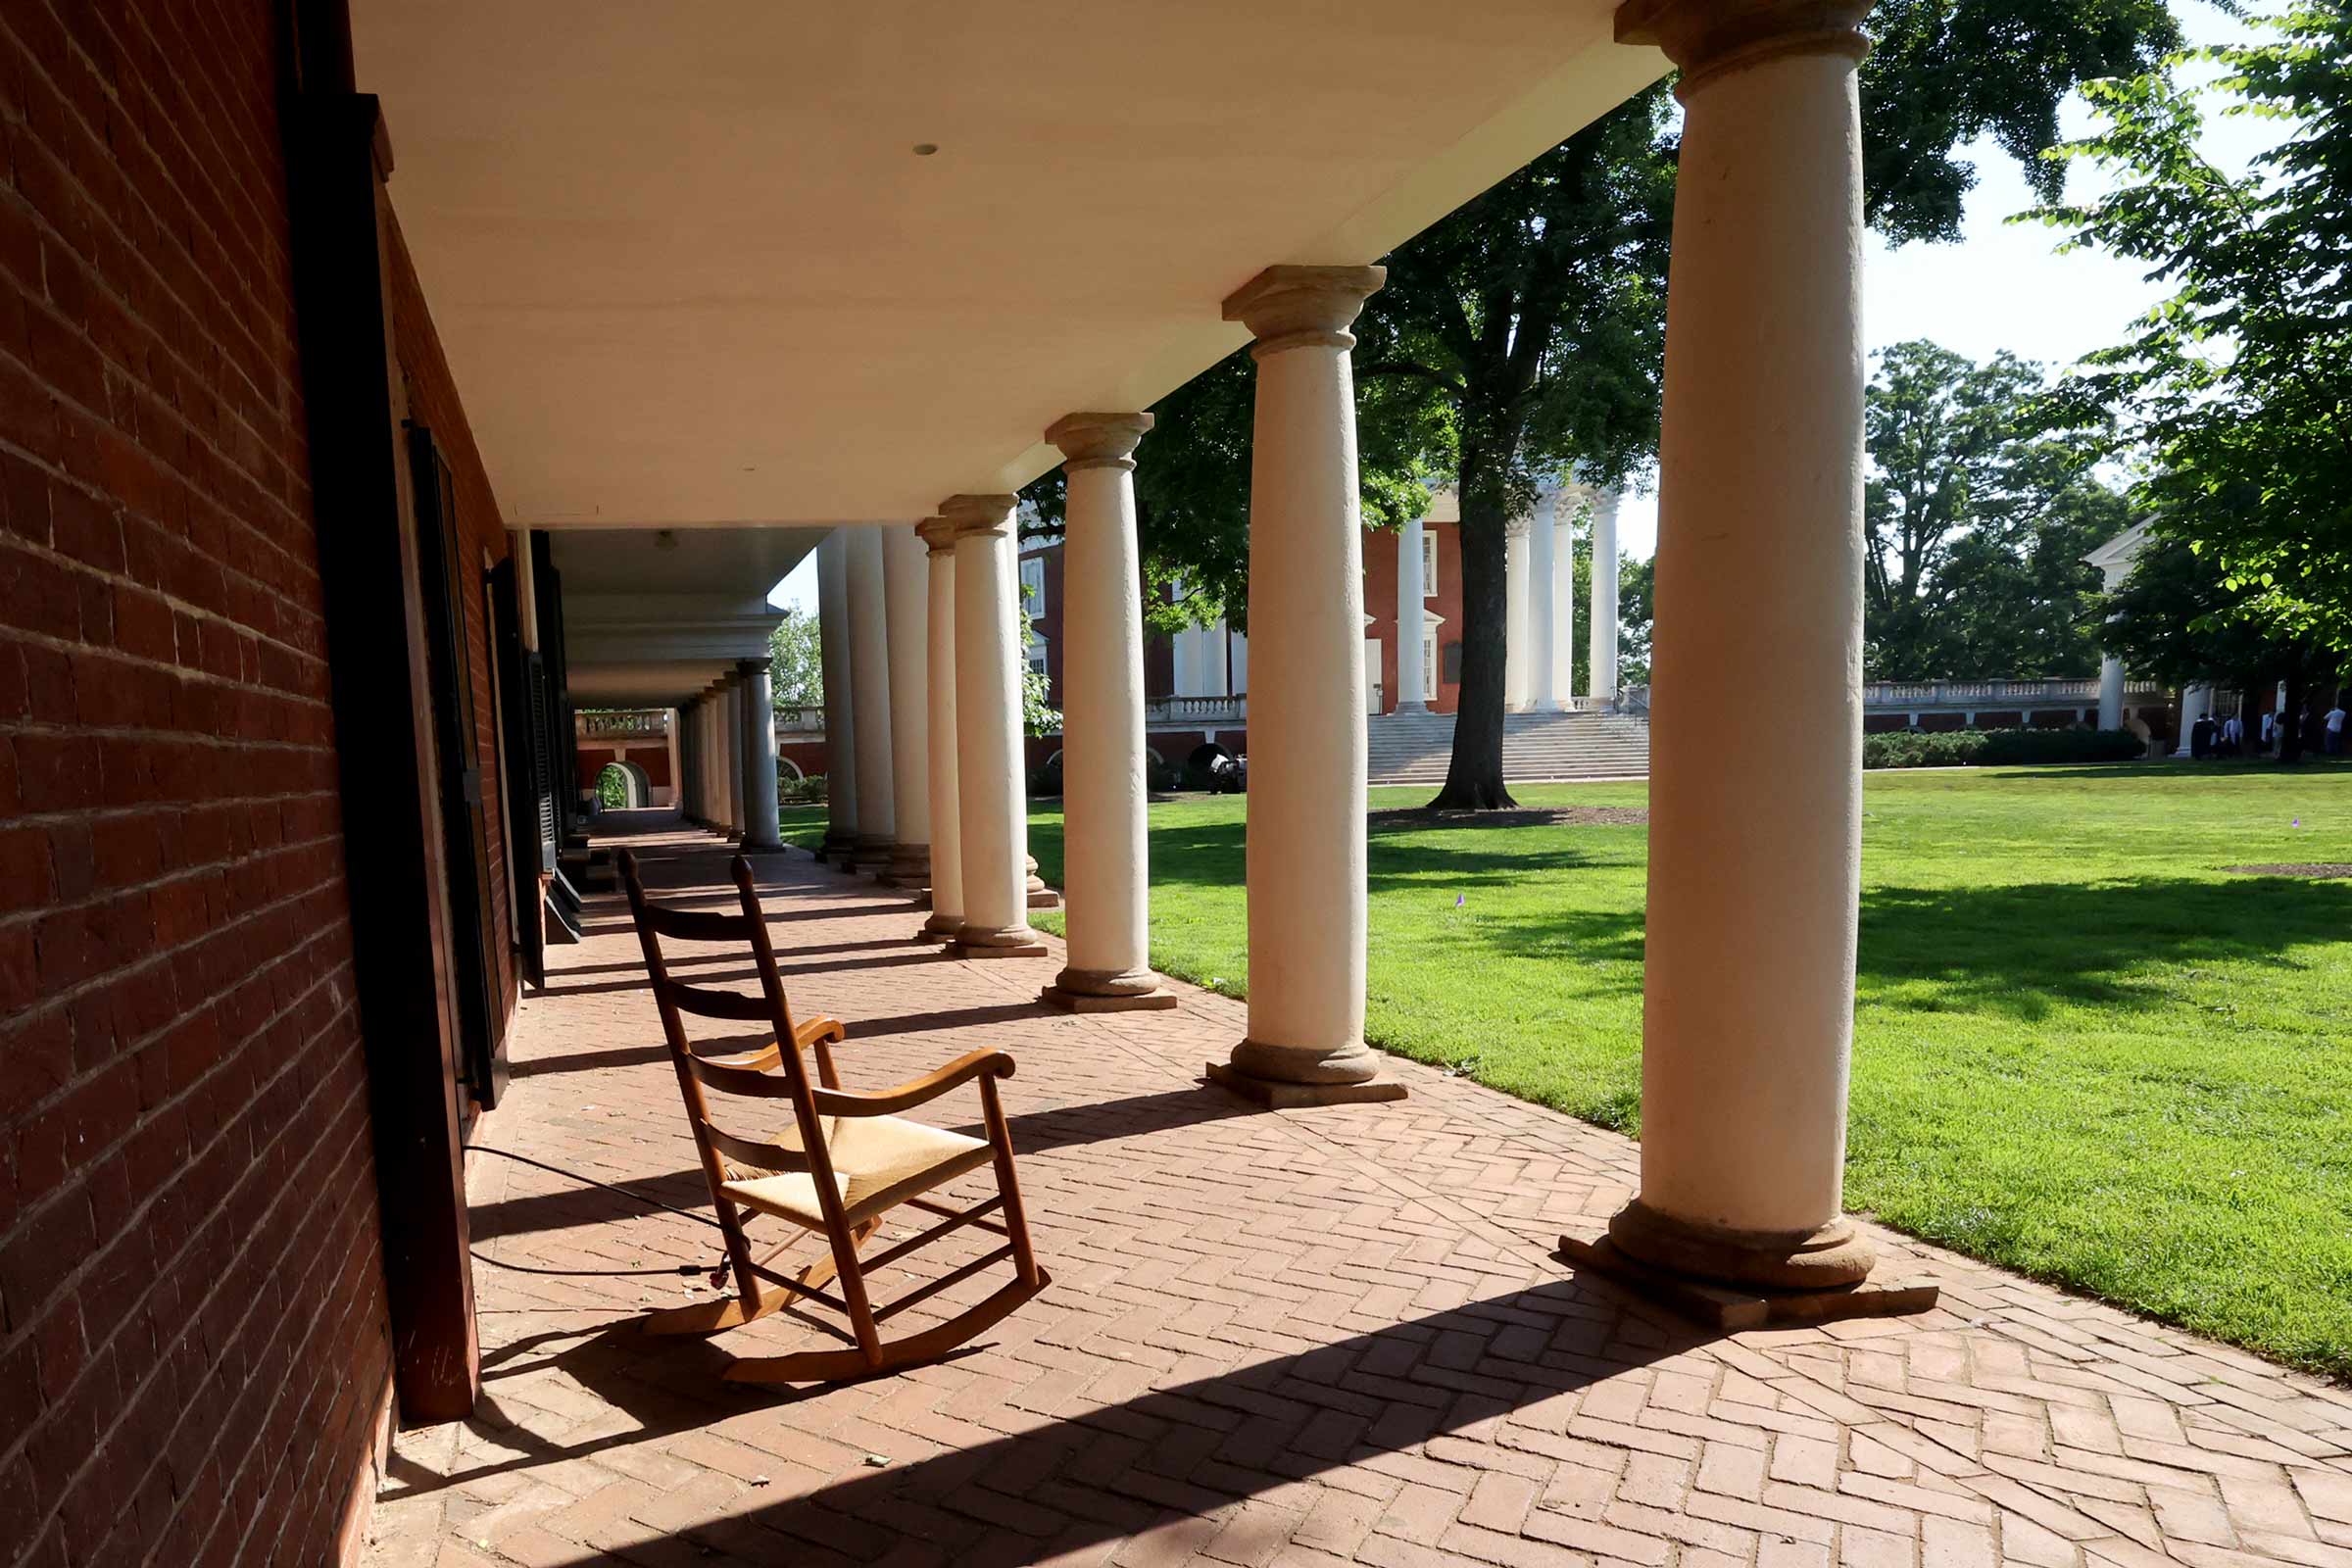 A lone rocking chair sits behind the columns on the Lawn.